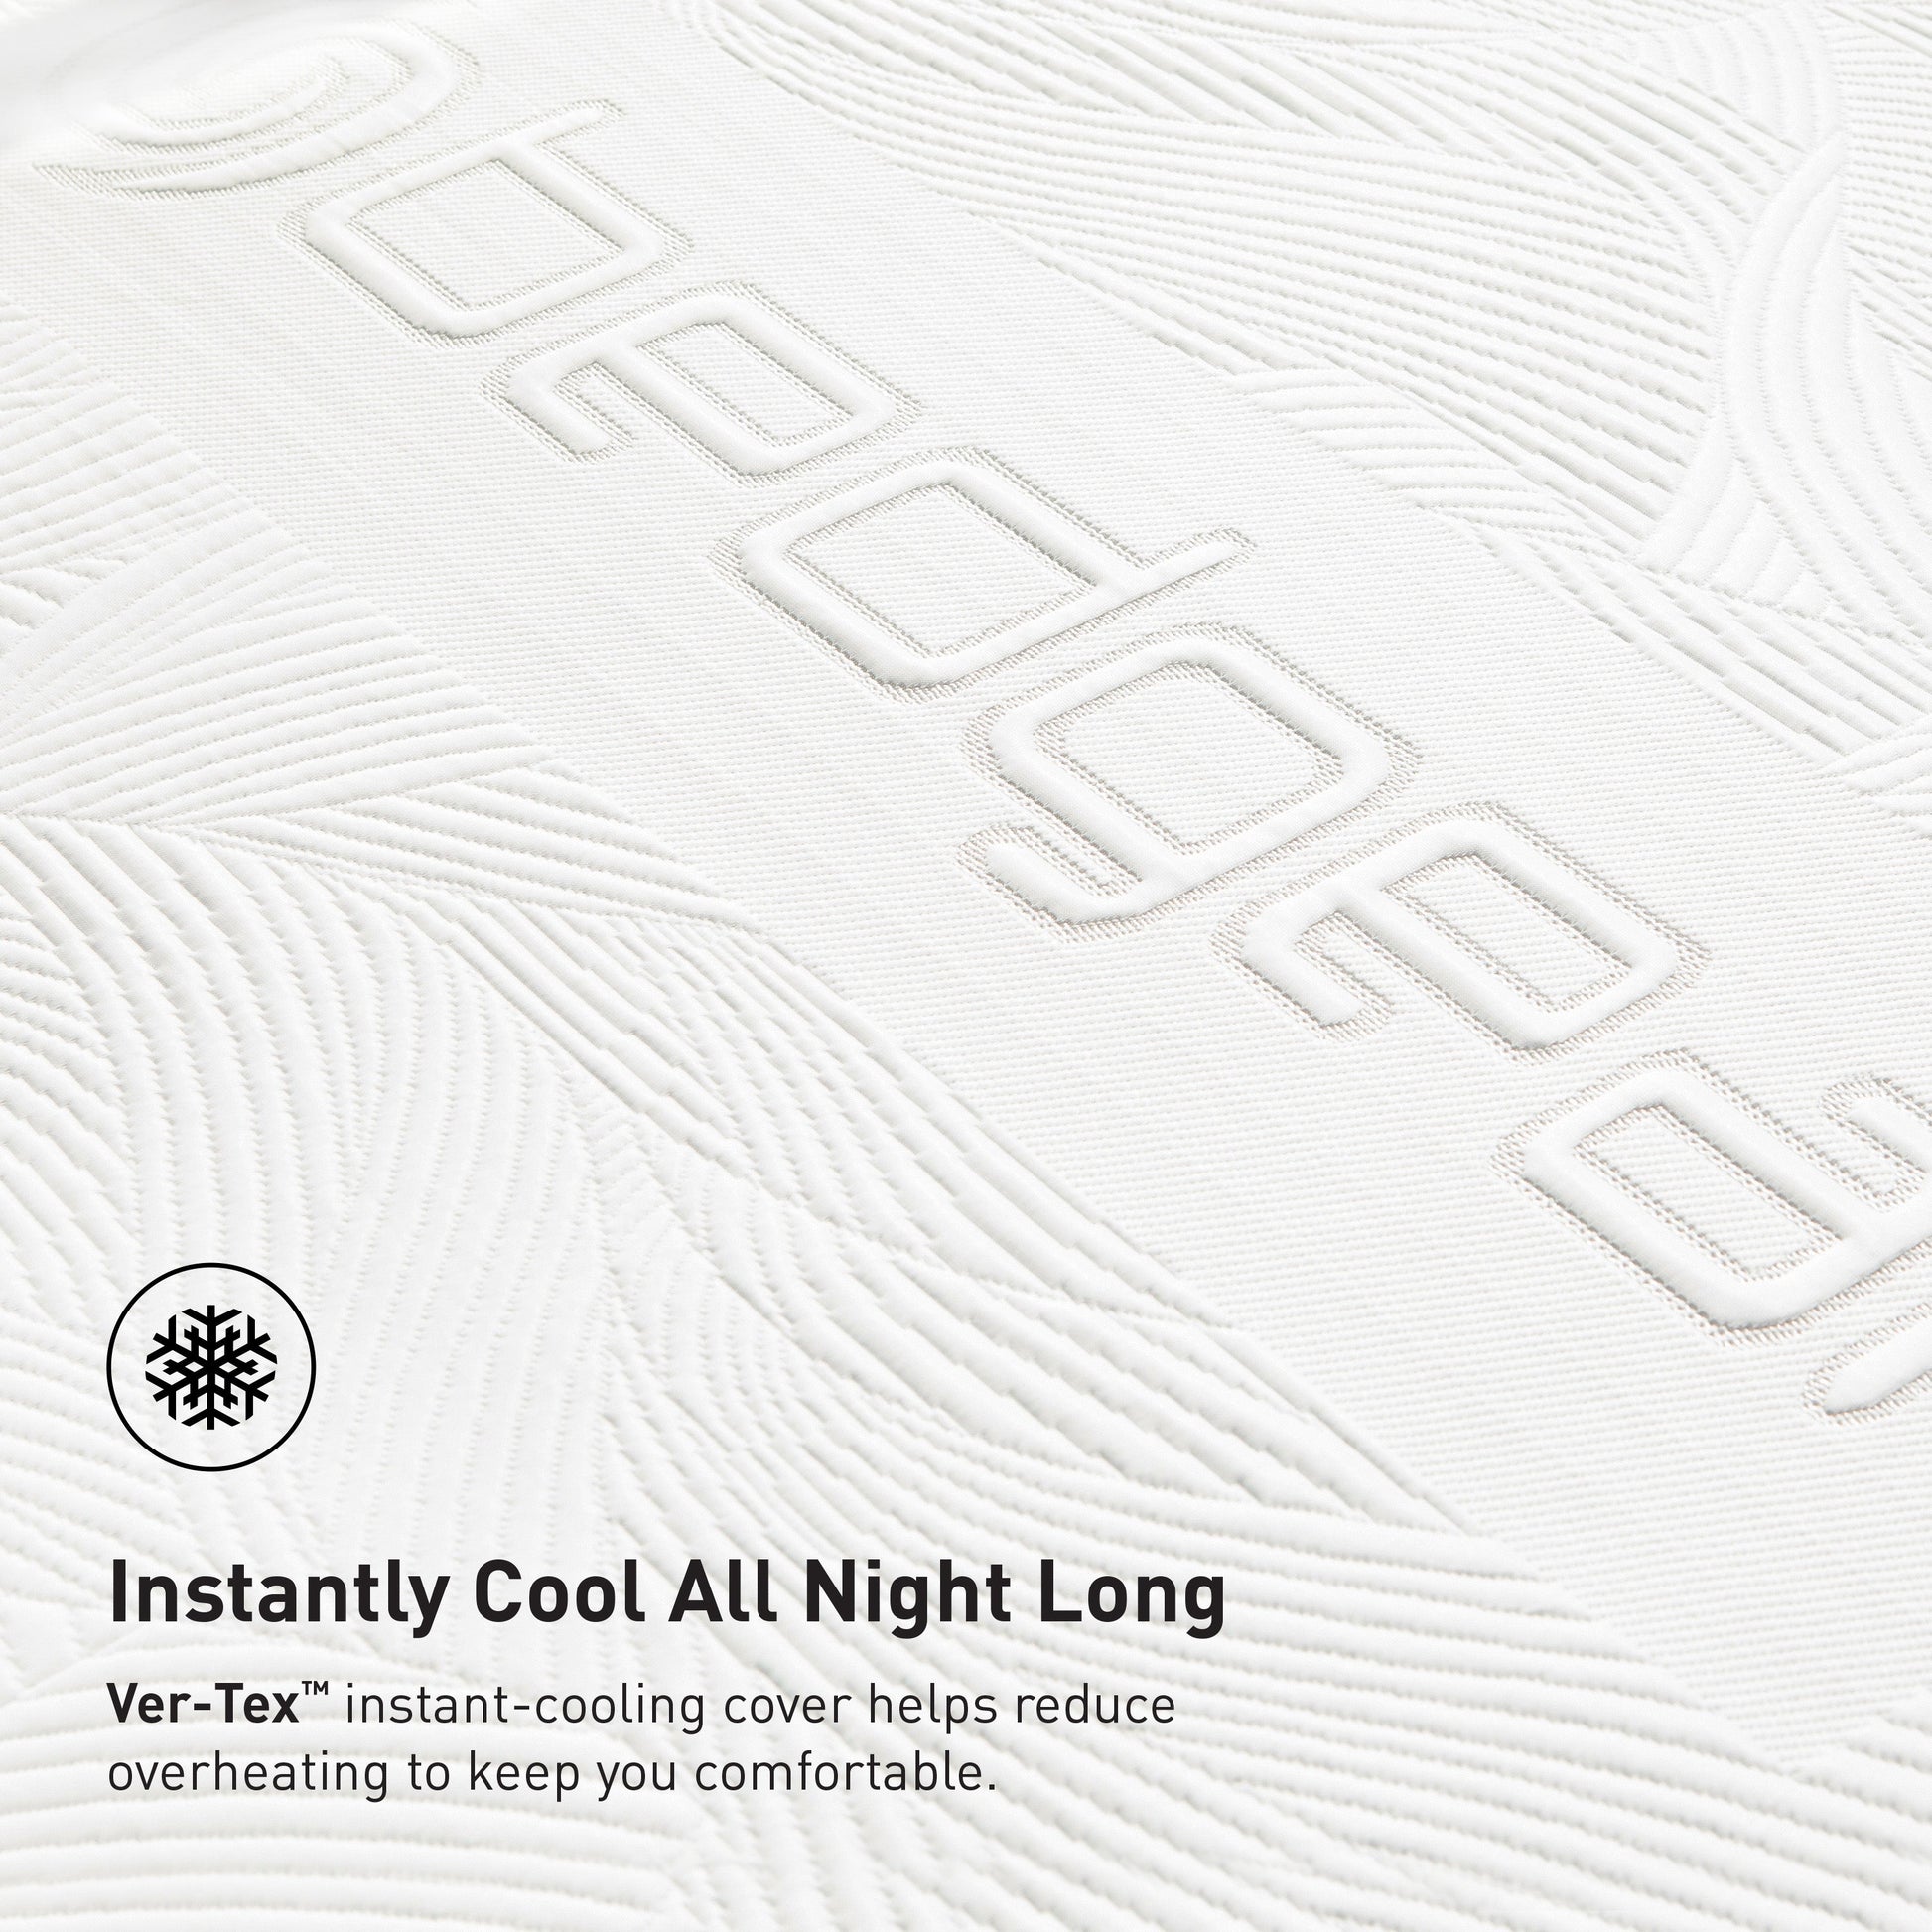 Bedgear S3 II Performance Mattress Instantly Coll All Night Long